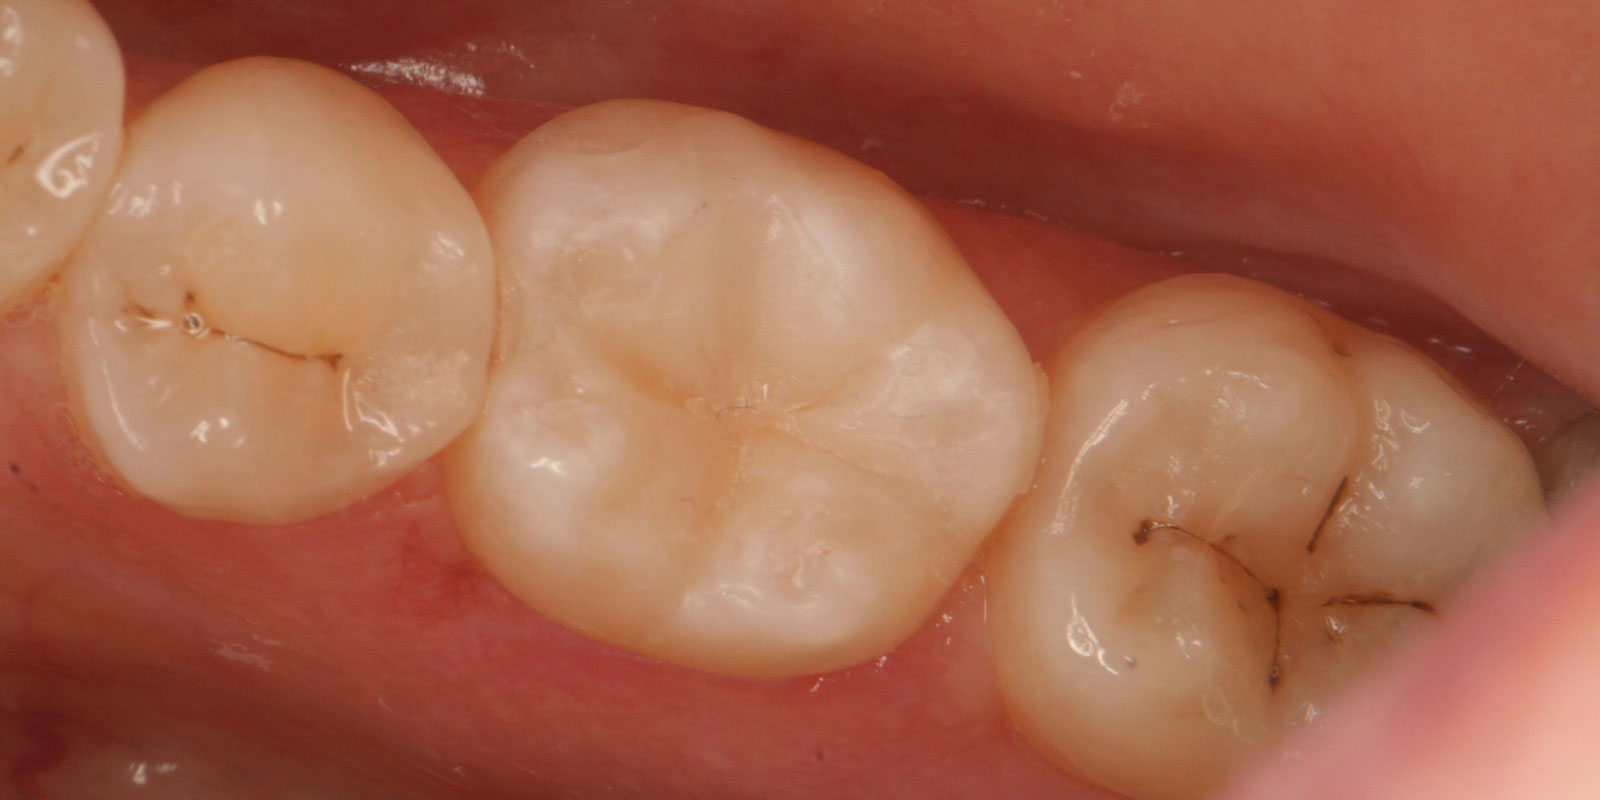 http://White%20fillings%20after